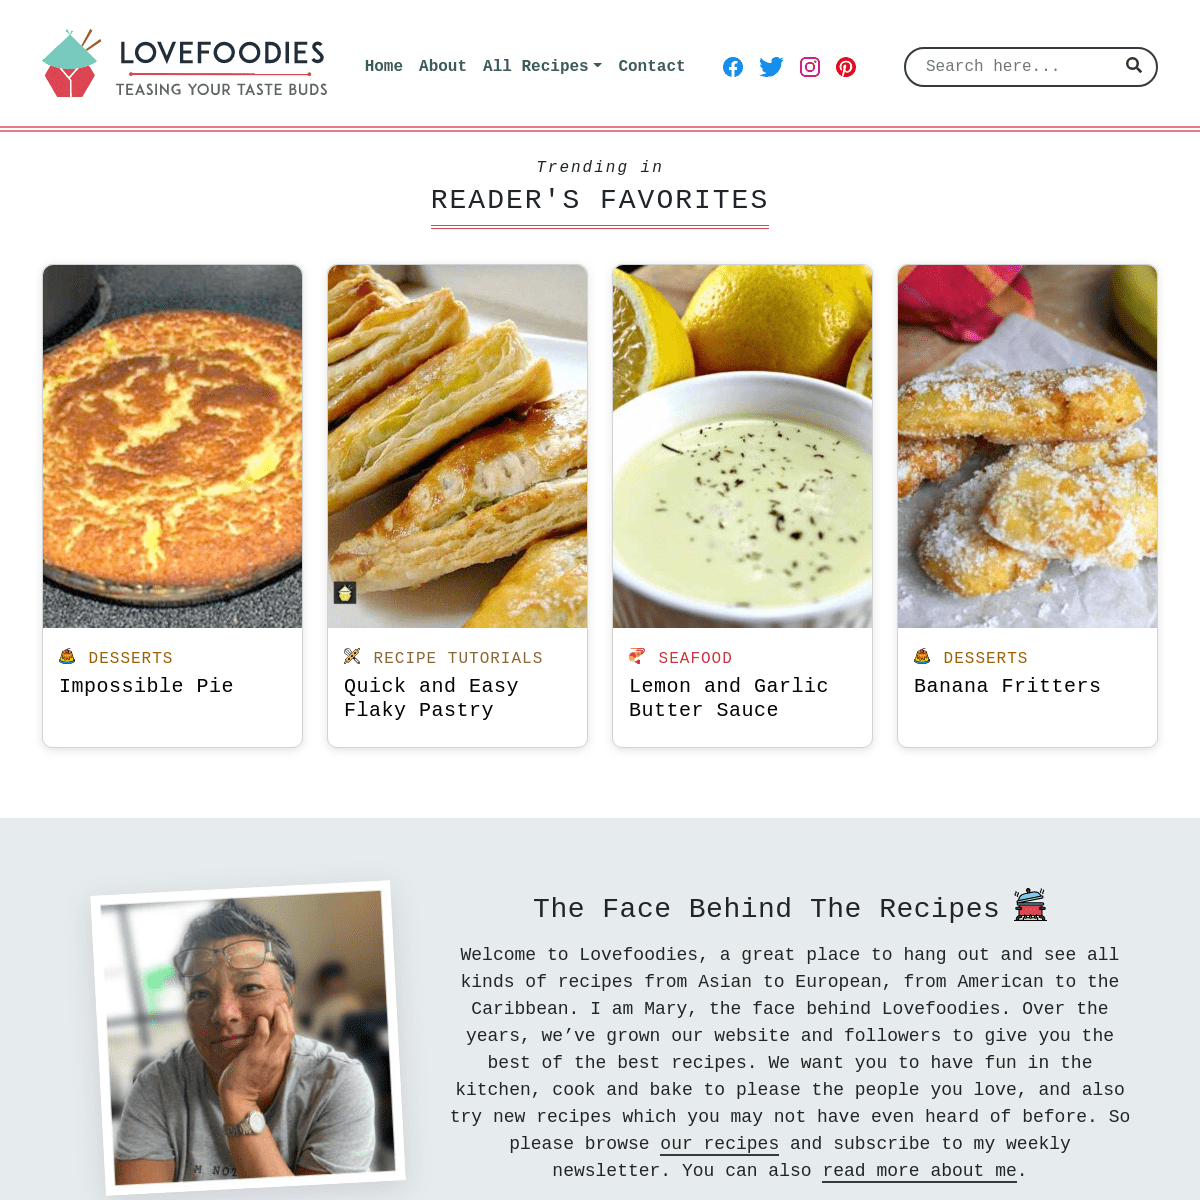 A complete backup of https://lovefoodies.com